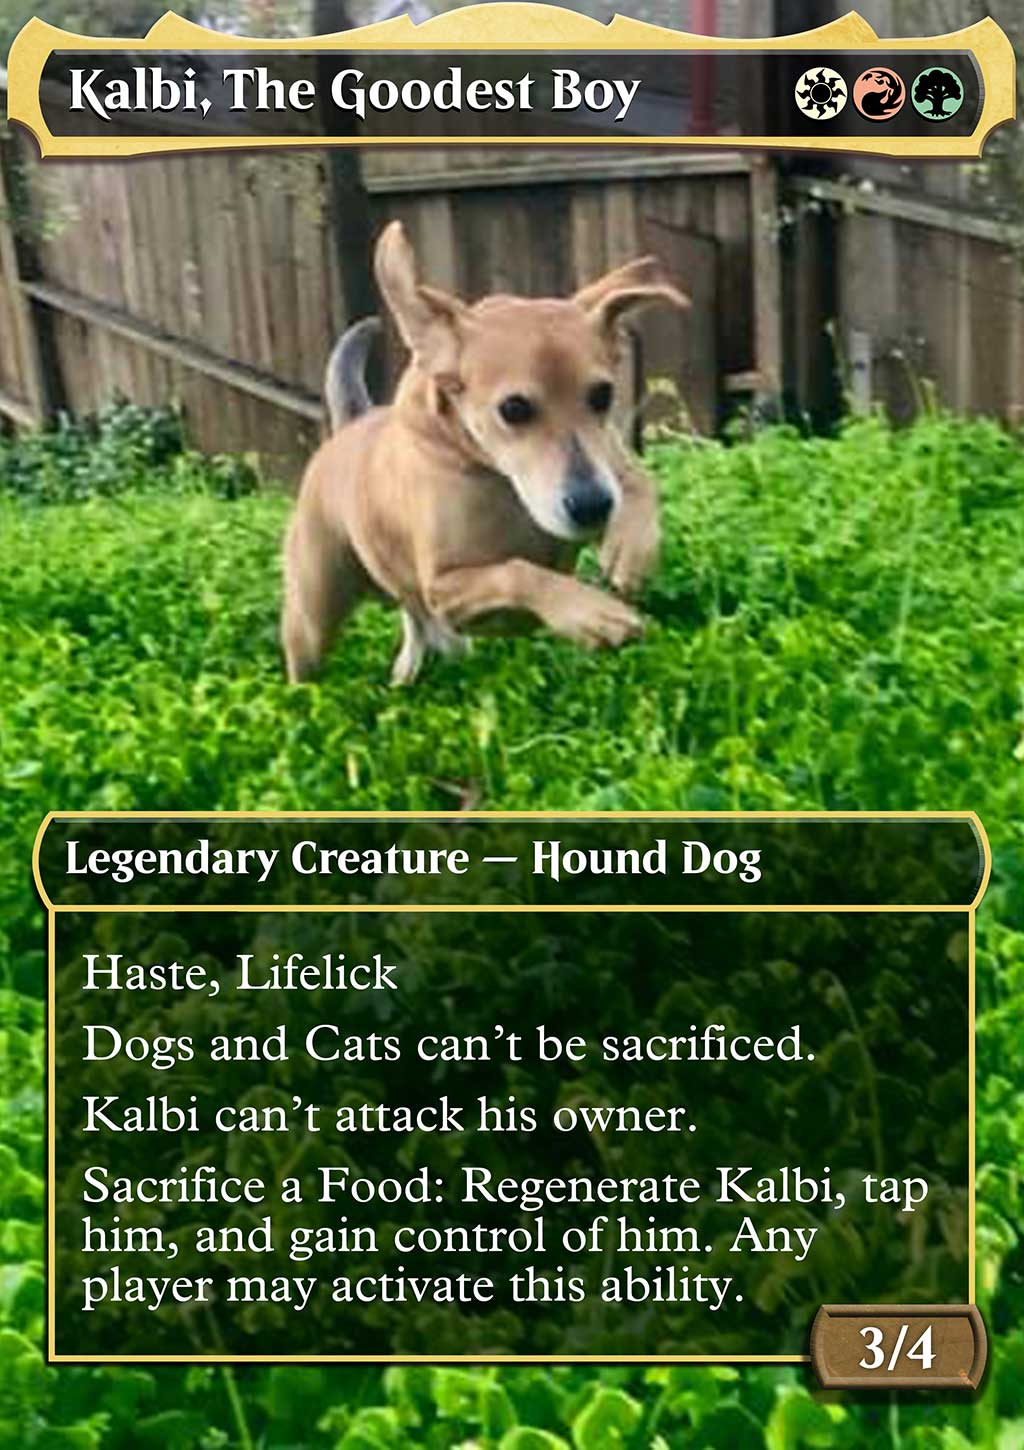 Custom Magic card. Kalbi, The Goodest Boy is a Legendary 3/4 Hound Dog creature. He costs one white, one red, and one green mana to cast. He has haste and lifelick (lifelink). Dogs and Cats can't be sacrificed. Kalbi can't attack his owner. Sacrifice a Food: Regenerate Kalbi, tap him, gain control of him. Any player may activate this ability.